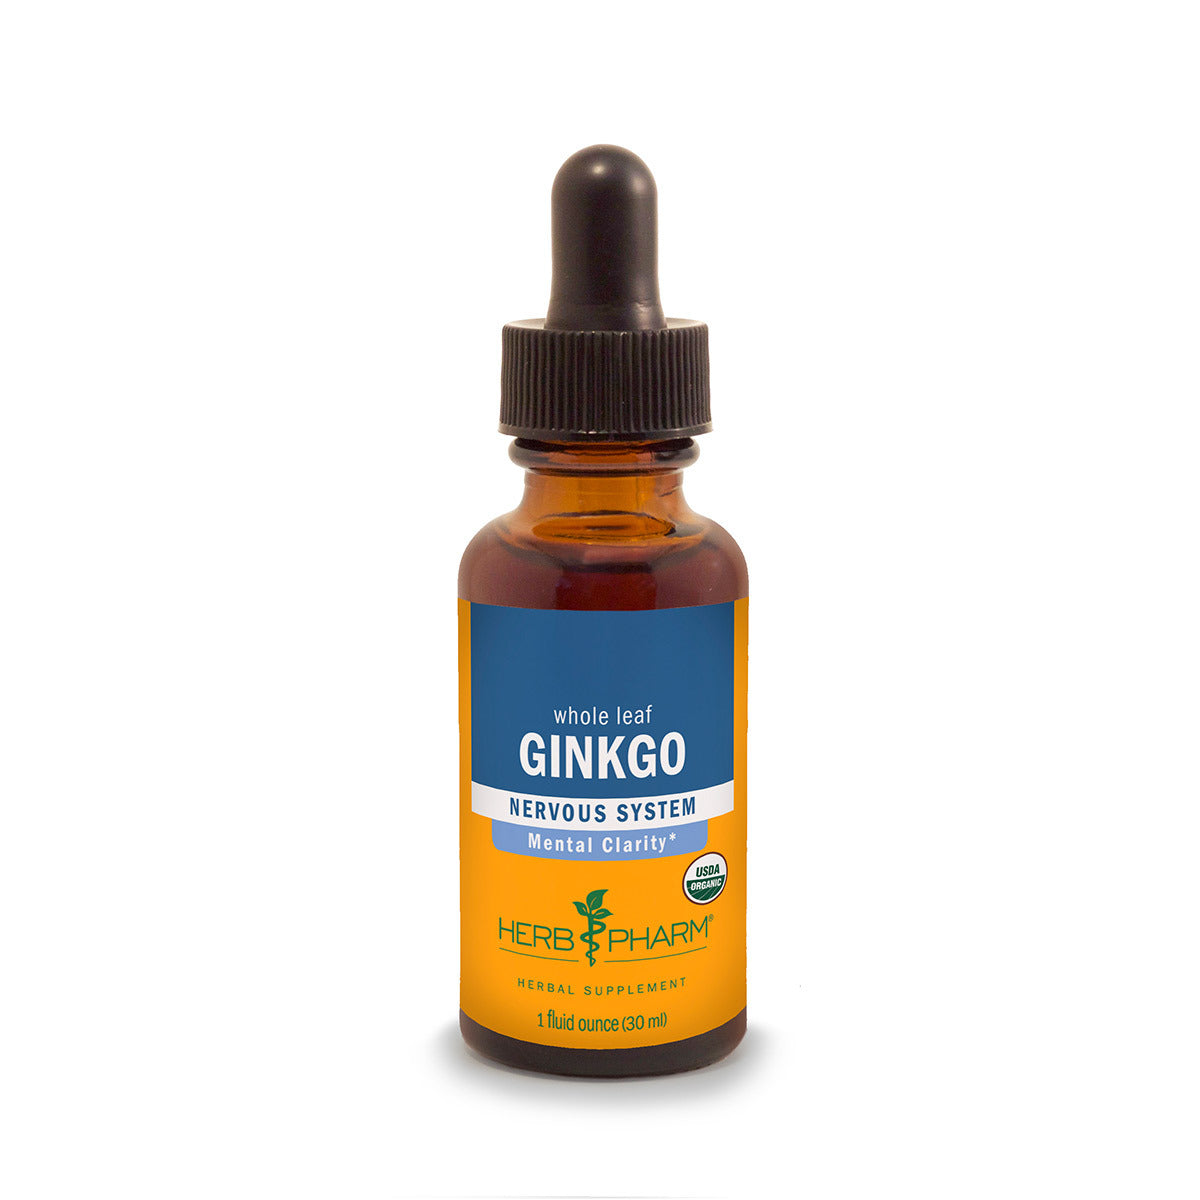 Primary image of Ginkgo Extract